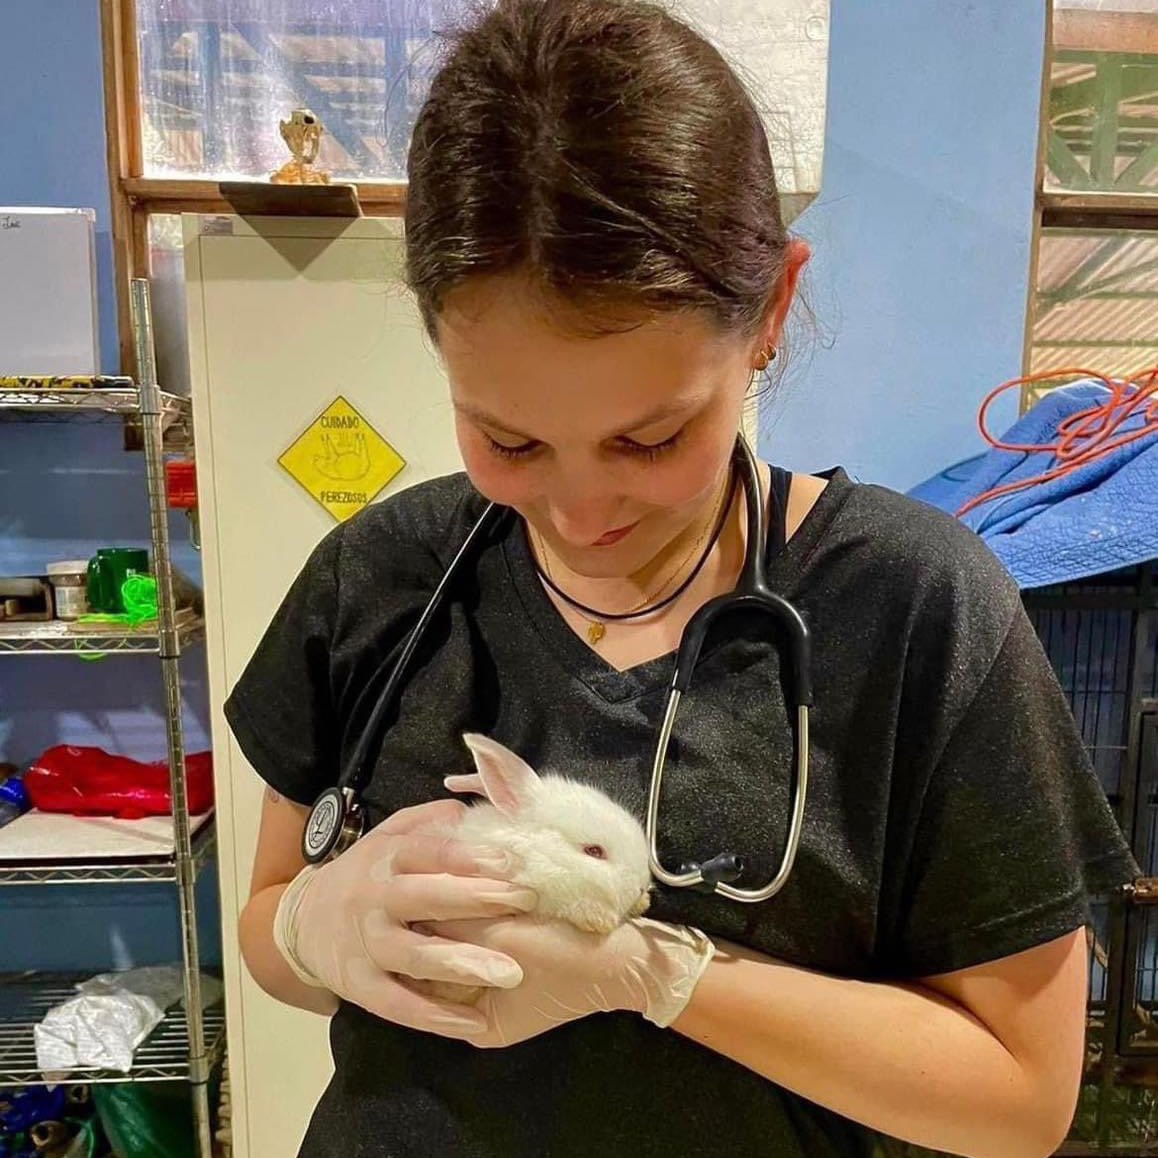 What will they be doing after graduation? Veterinary Science graduate and University Scholar, Ainsley Watt, will head to Knoxville to attend the @utcvm. One of over 20 Skyhawk Aggies heading to Veterinary school after graduation. Soaring! #beUTMproud #BeOneUT